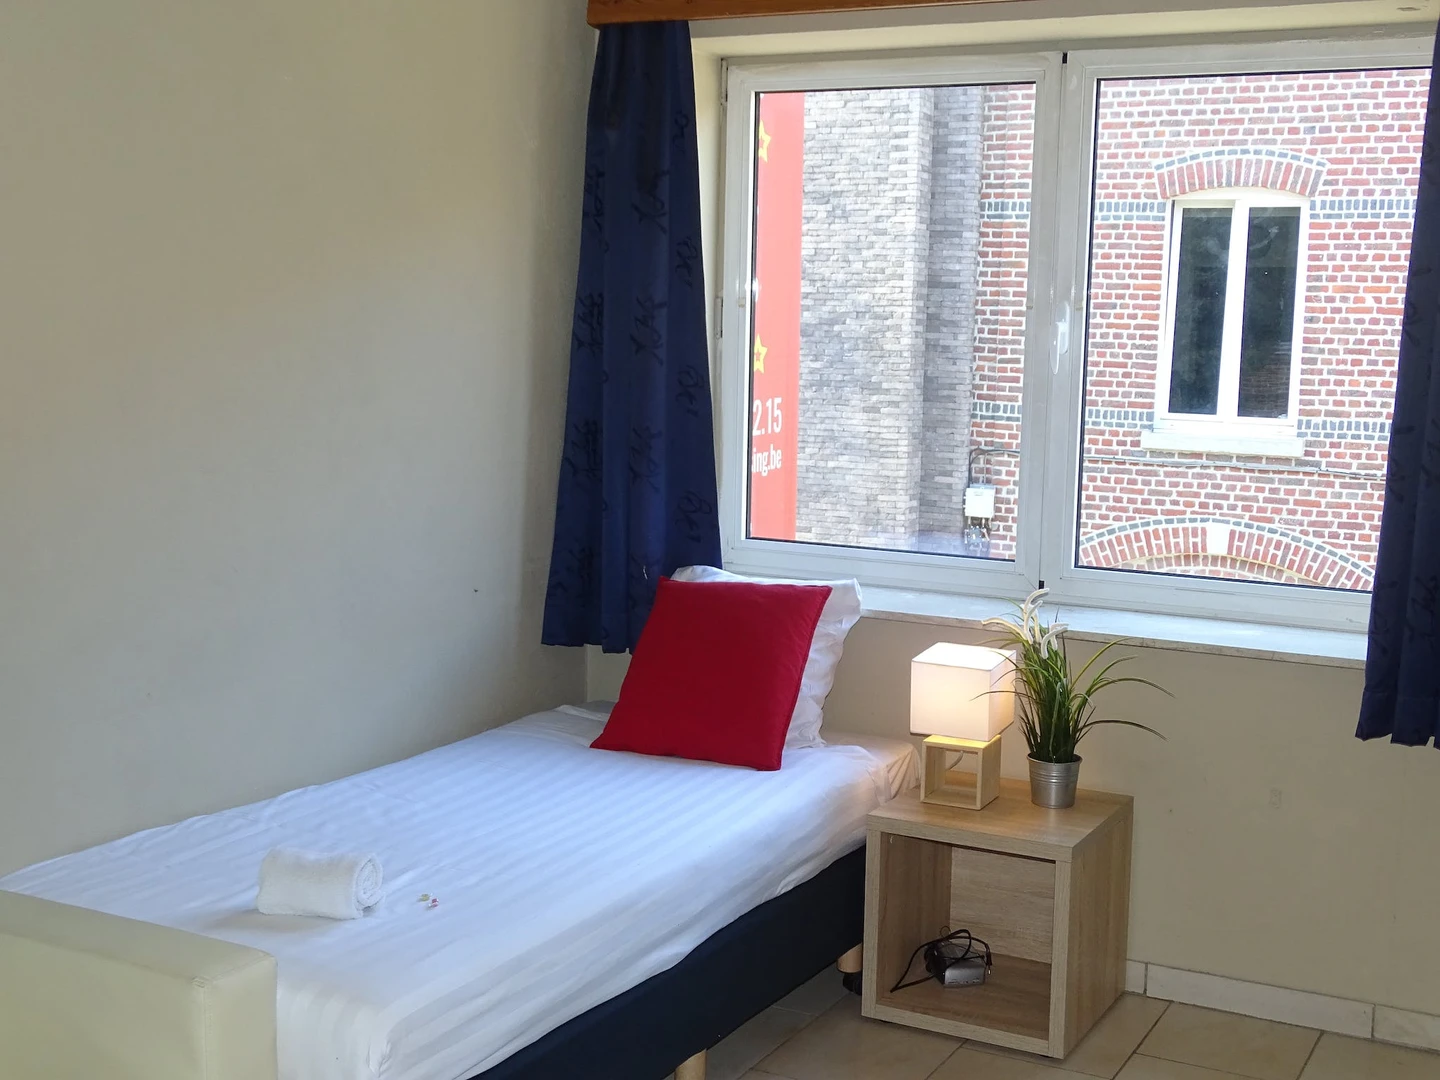 Room for rent in a shared flat in Leuven